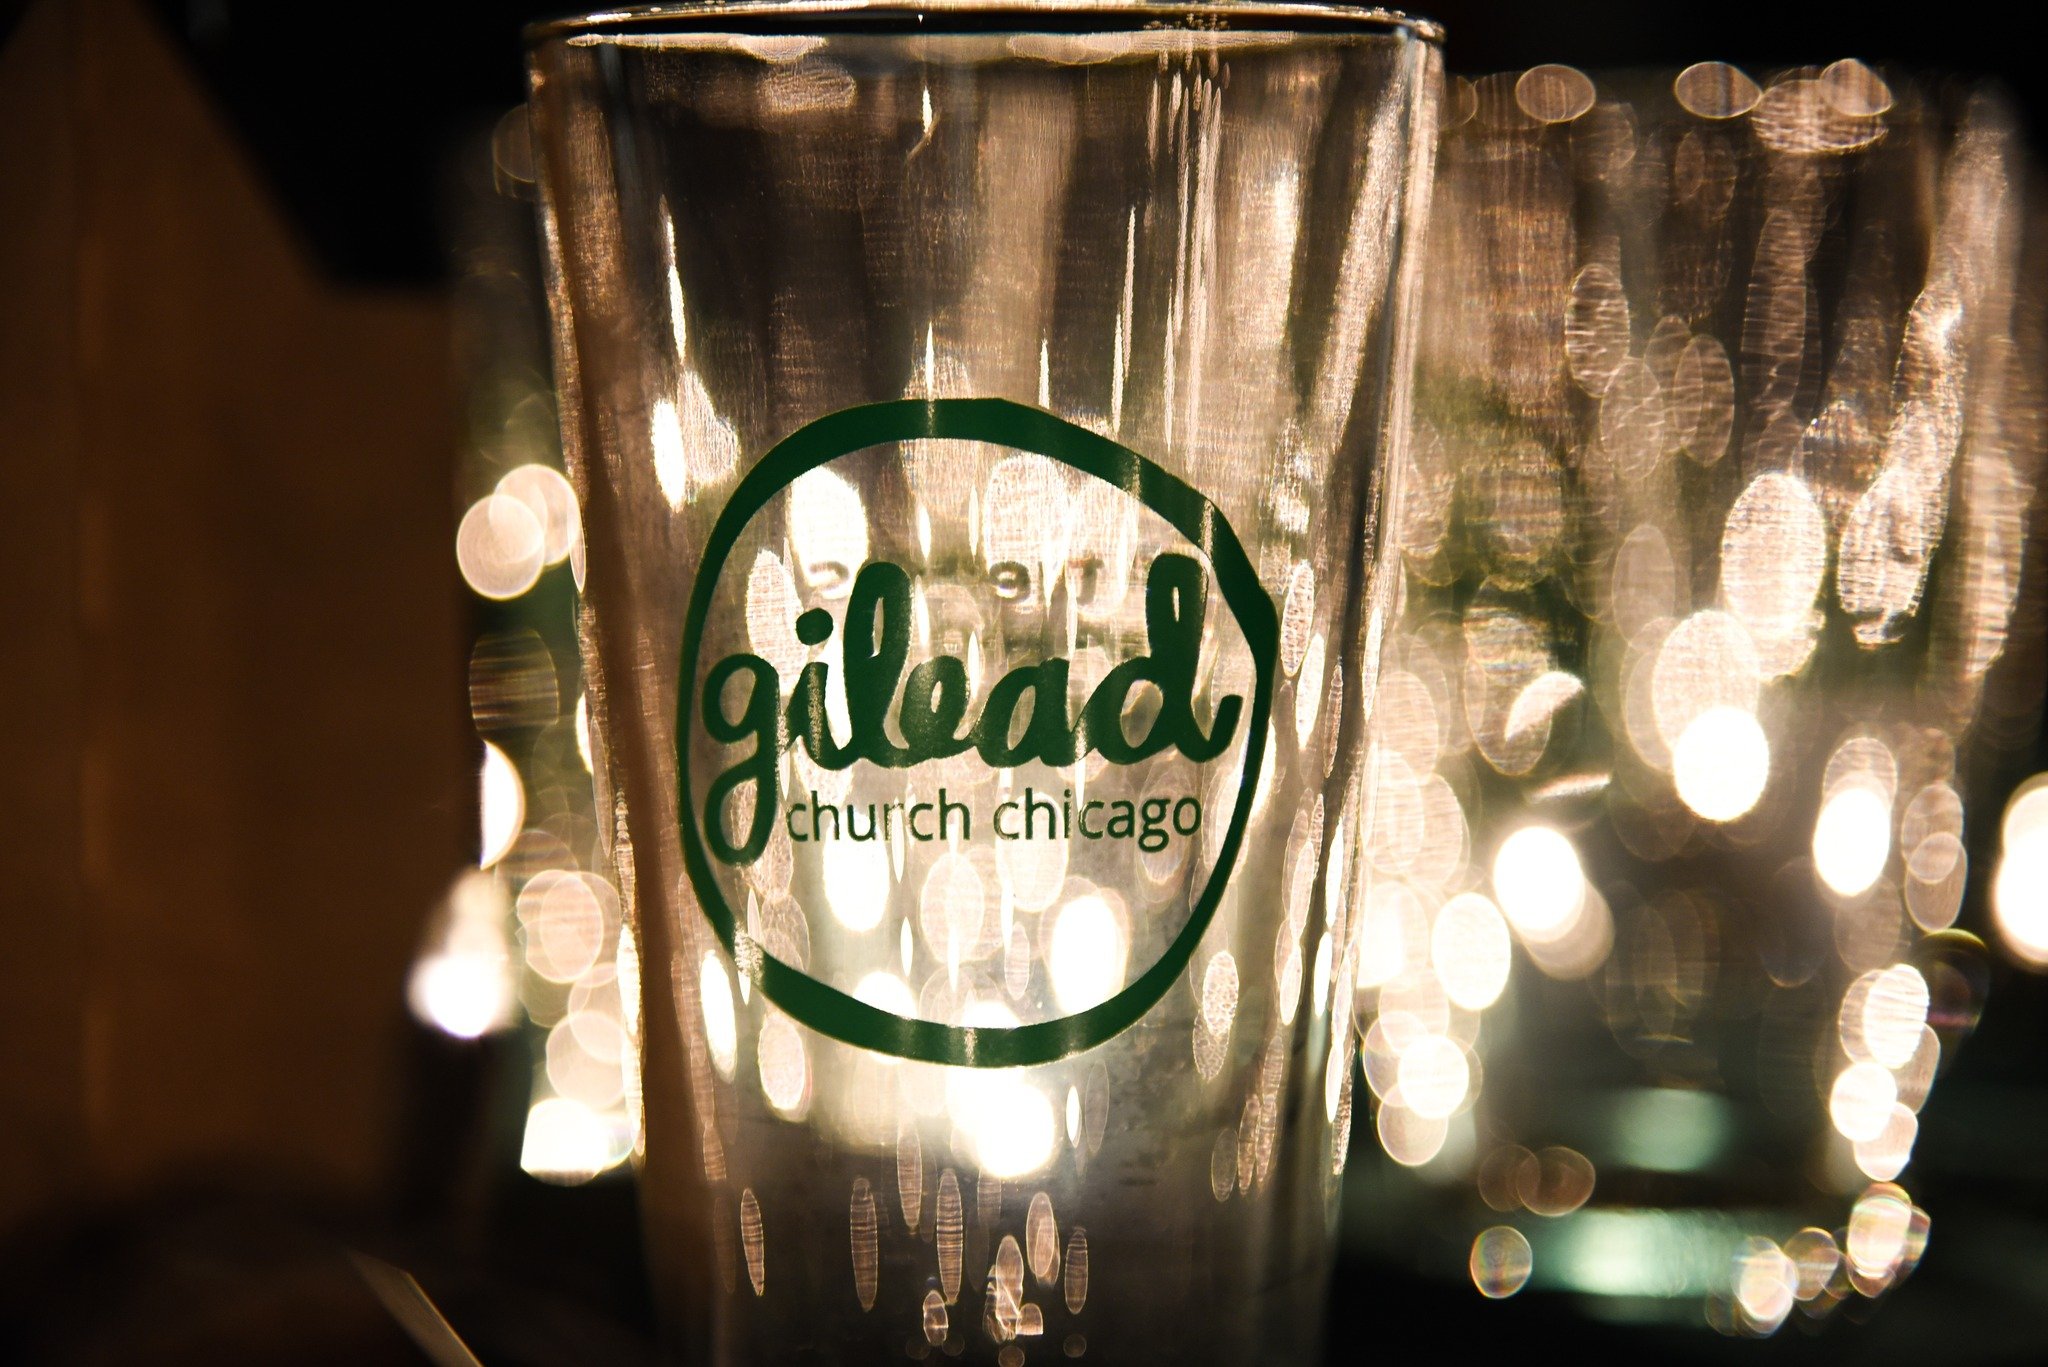 Let's have dinner together! Our next service is May 26th, but on the 19th we'd love to see you and hang out as a community! We're gathering at @mybuddyschicago . There's an optional brainstorm for auction ideas (if you want to talk about the Gilead a